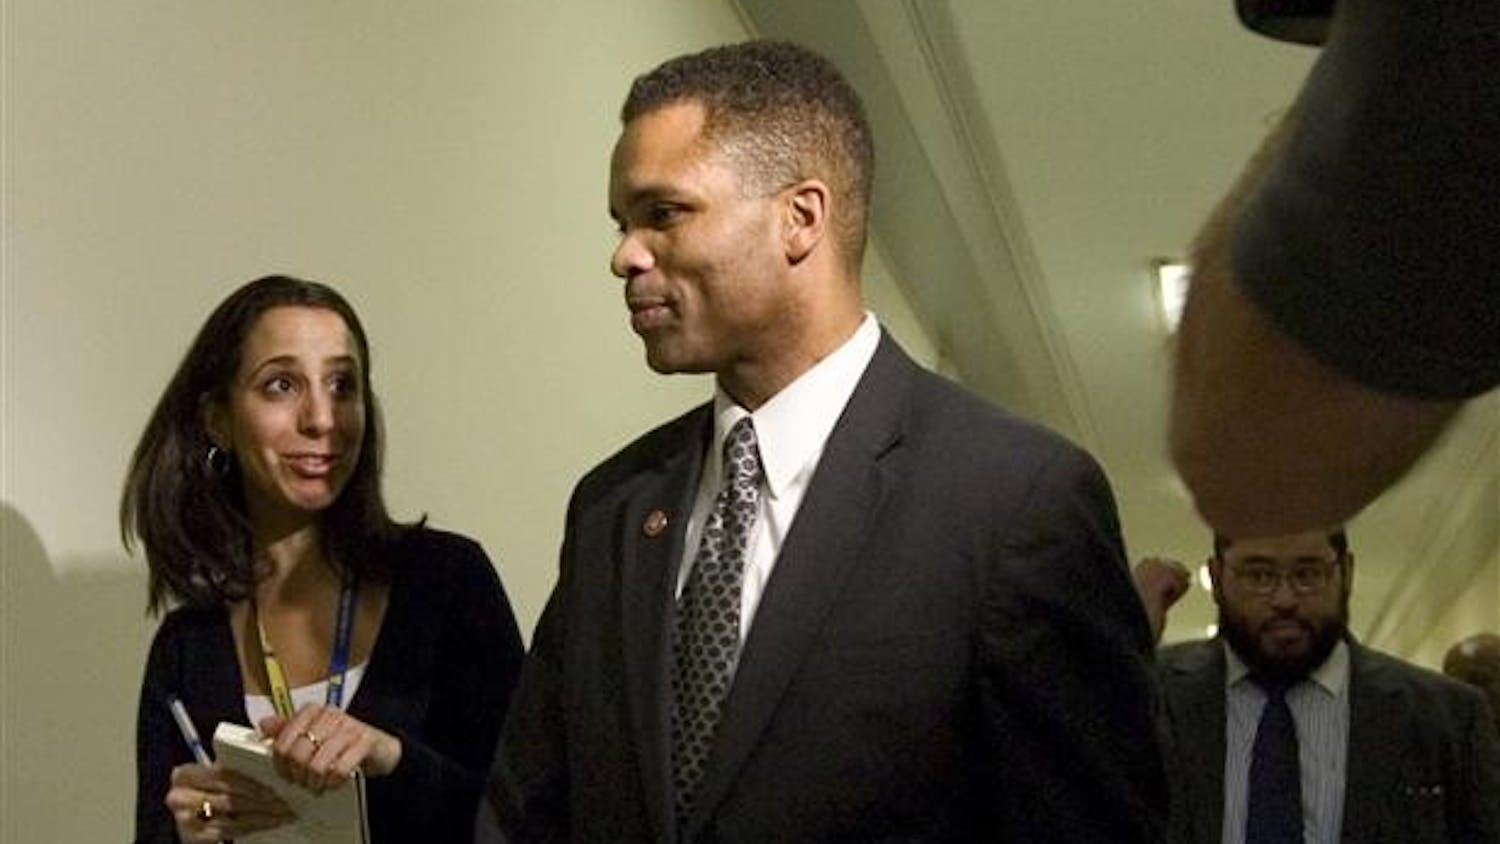 Rep. Jesse Jackson Jr., D-Ill., returns to his office in the Rayburn House Office Building on Capitol Hill after telling reporters he is not a target of the federal investigation of Illinois Gov. Rod Blagojevich, Wednesday in Washington. Wire-tapped conversations indicated that Blagojevich felt that Rep. Jackson could raise campaign money for him in exchange for being appointed to the Senate seat vacated by President-elect Barack Obama. 